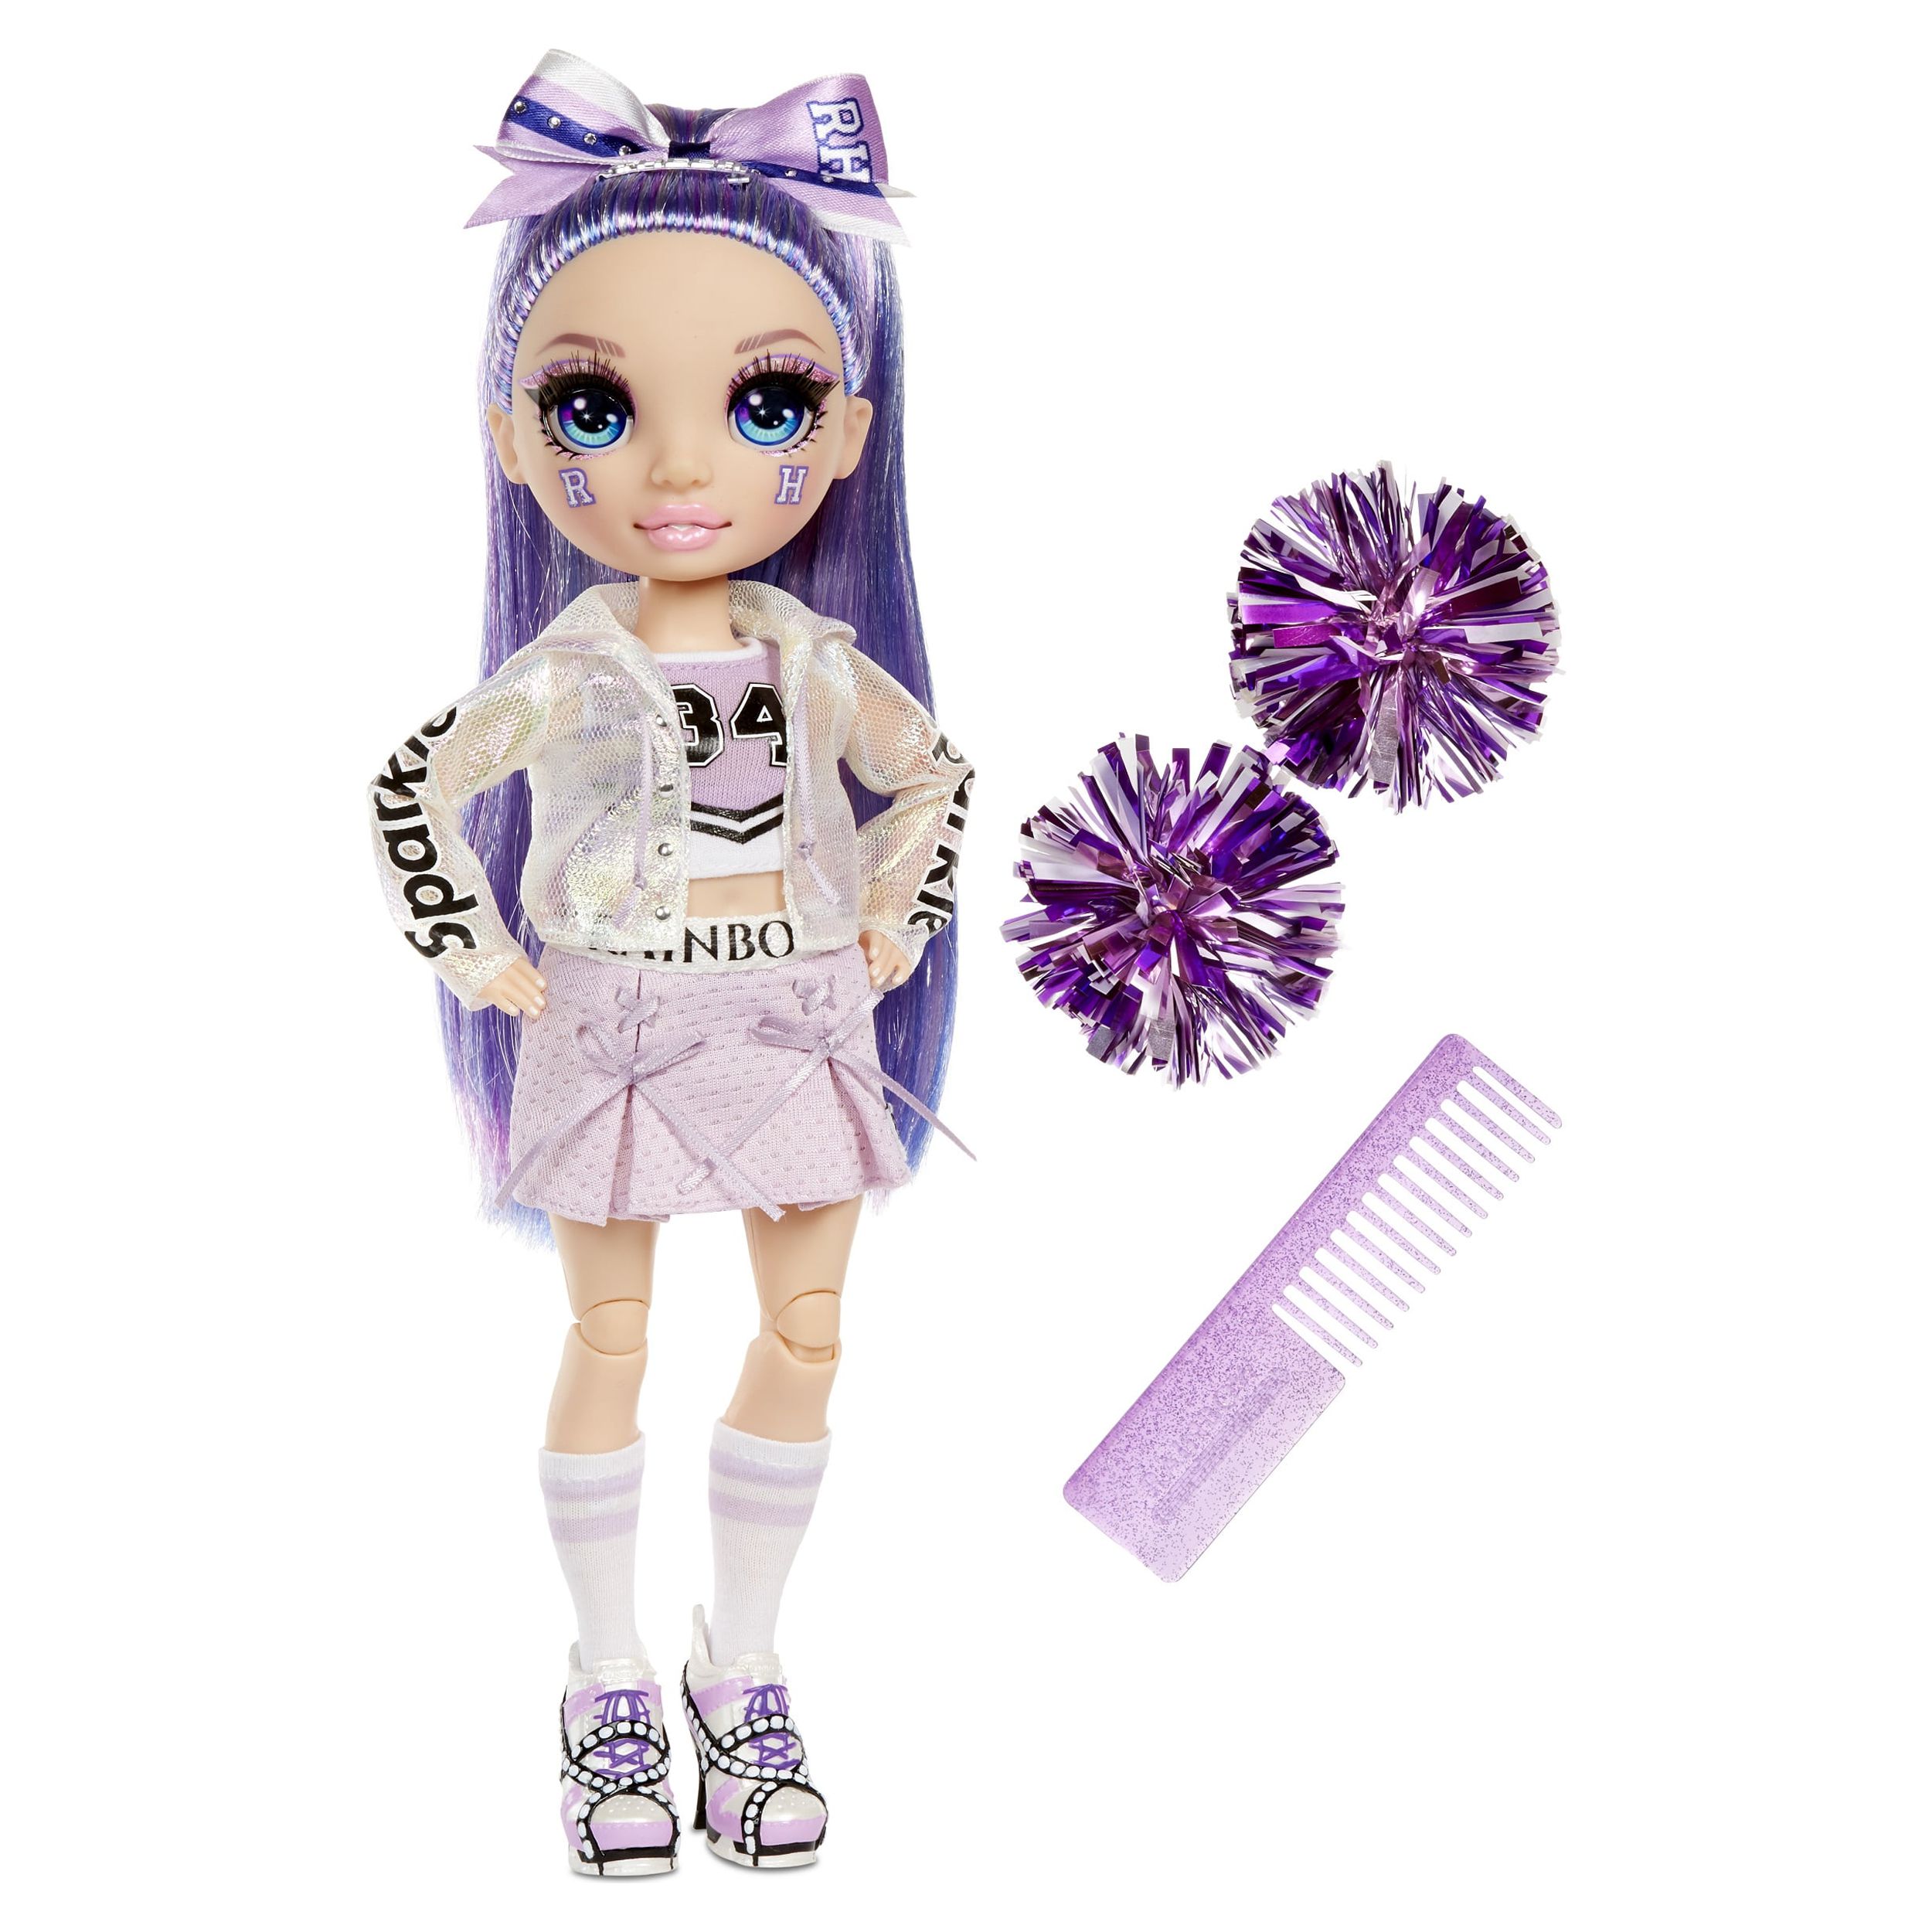 Rainbow High Cheer Violet Willow – Purple Fashion Doll with Pom Poms, Cheerleader Doll, Toys for Kids 6-12 Years Old - image 4 of 8